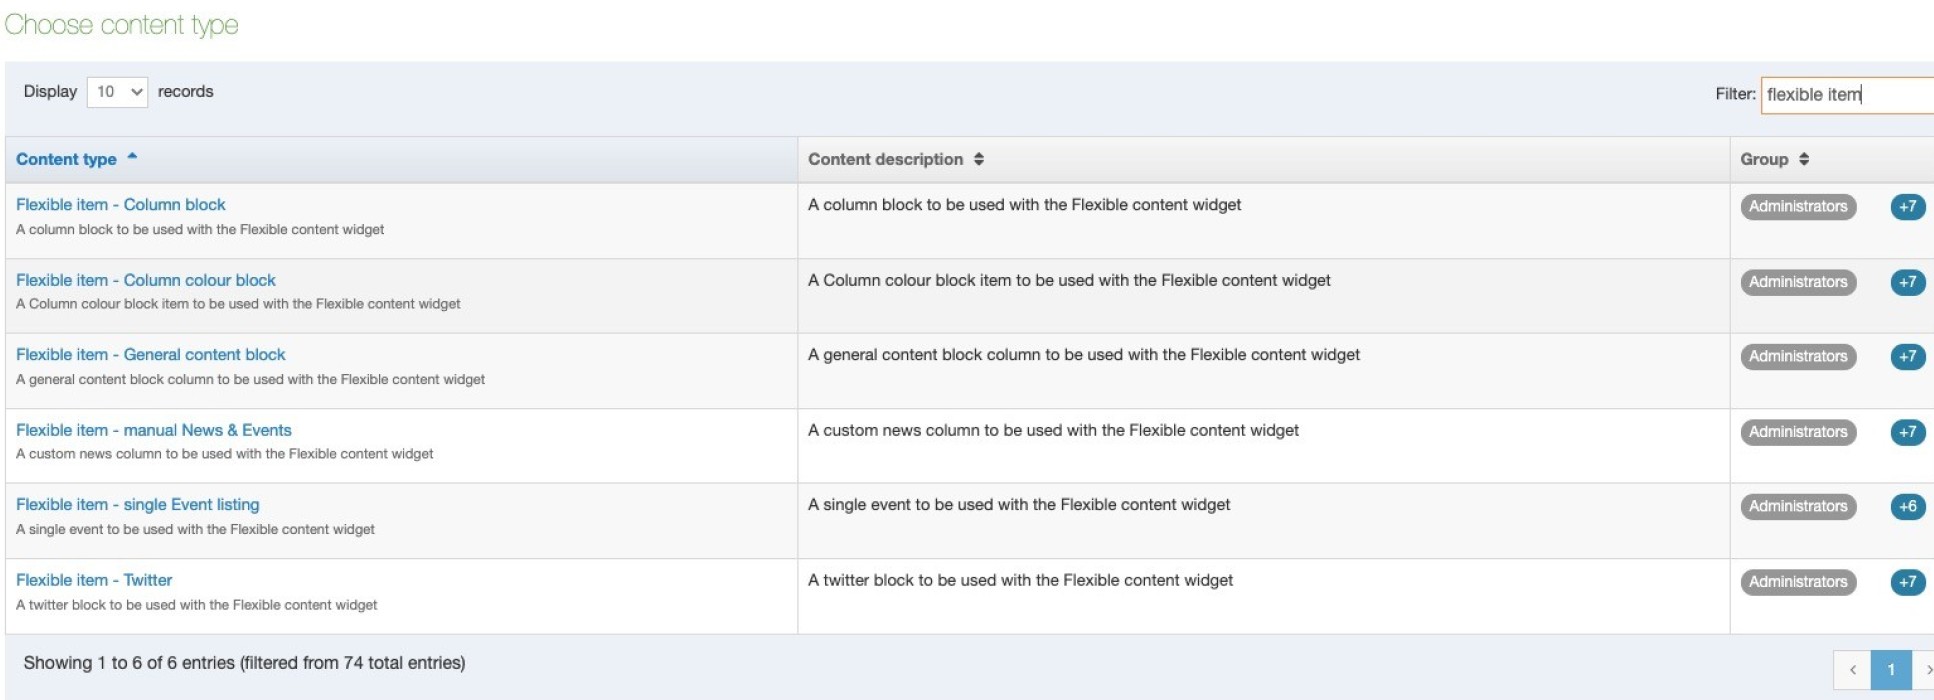 Choose a content type screen filtered by 'flexible item'